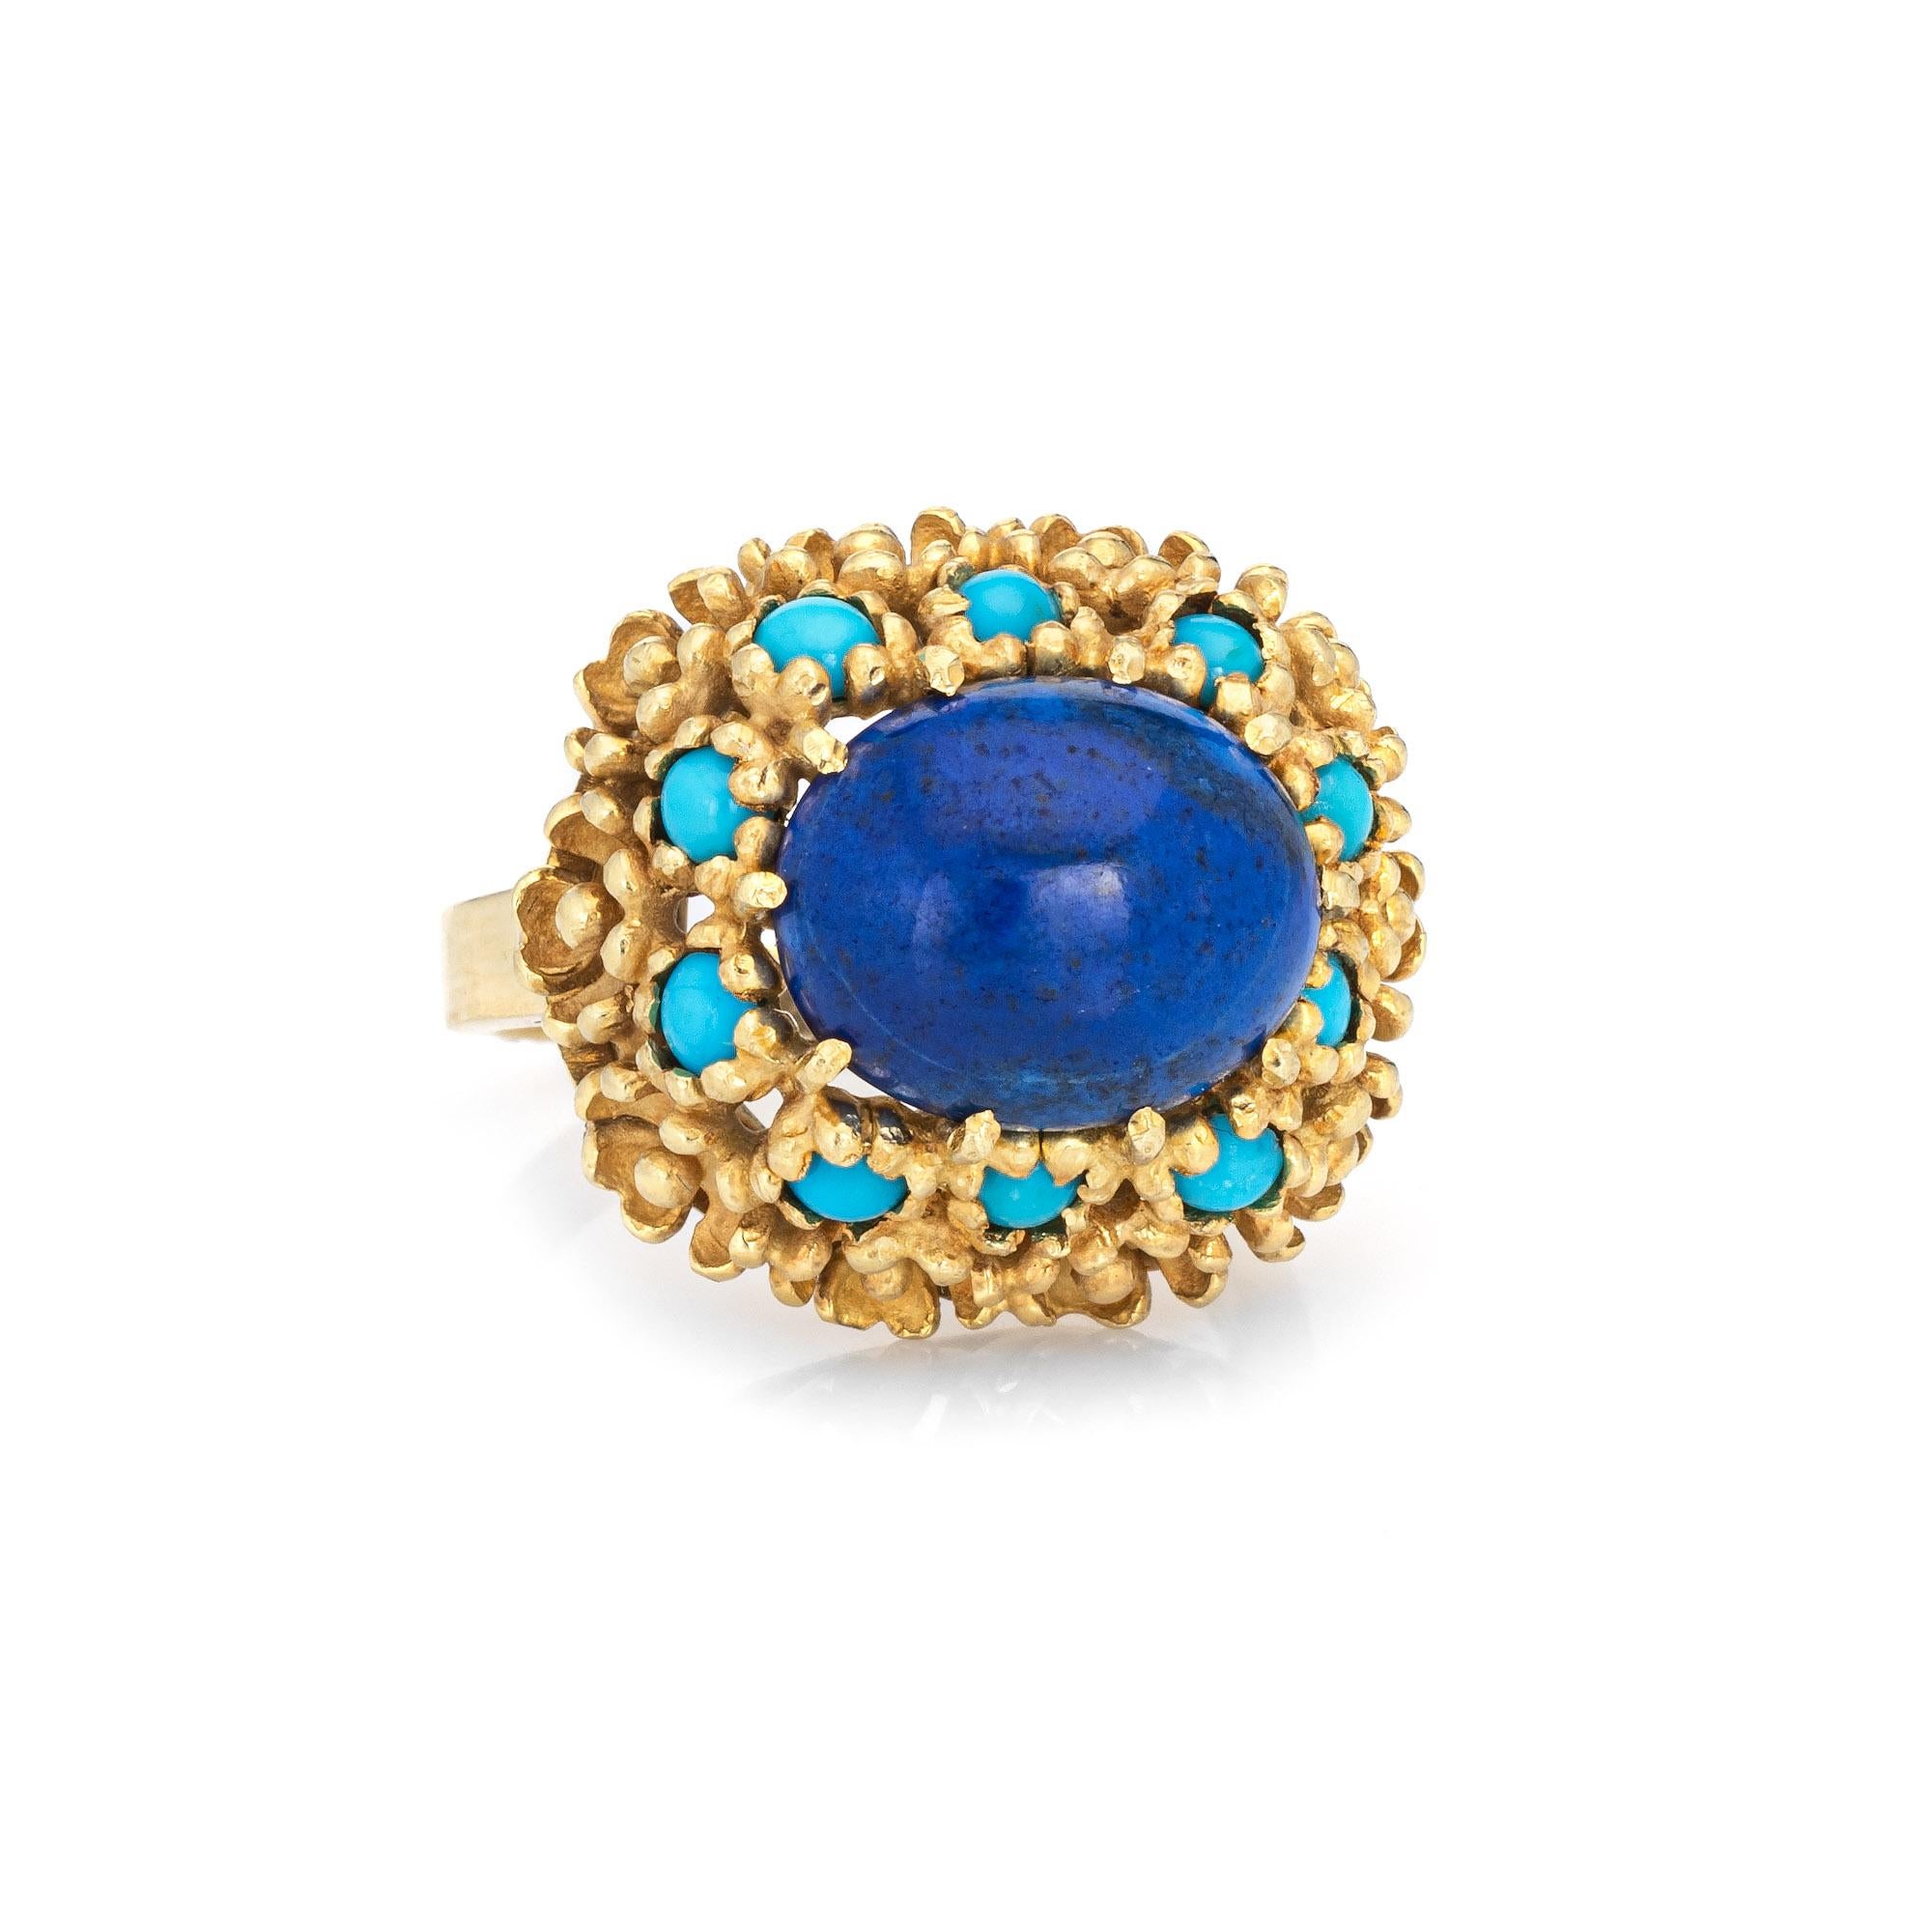 Stylish vintage lapis lazuli & turquoise ring (circa 1970s) crafted in 18 karat yellow gold. 

Lapis lazuli measures 12mm x 10mm (estimated at 4.50 carats). The turquoise cabochons each measure 2mm. The lapis & turquoise is in excellent condition